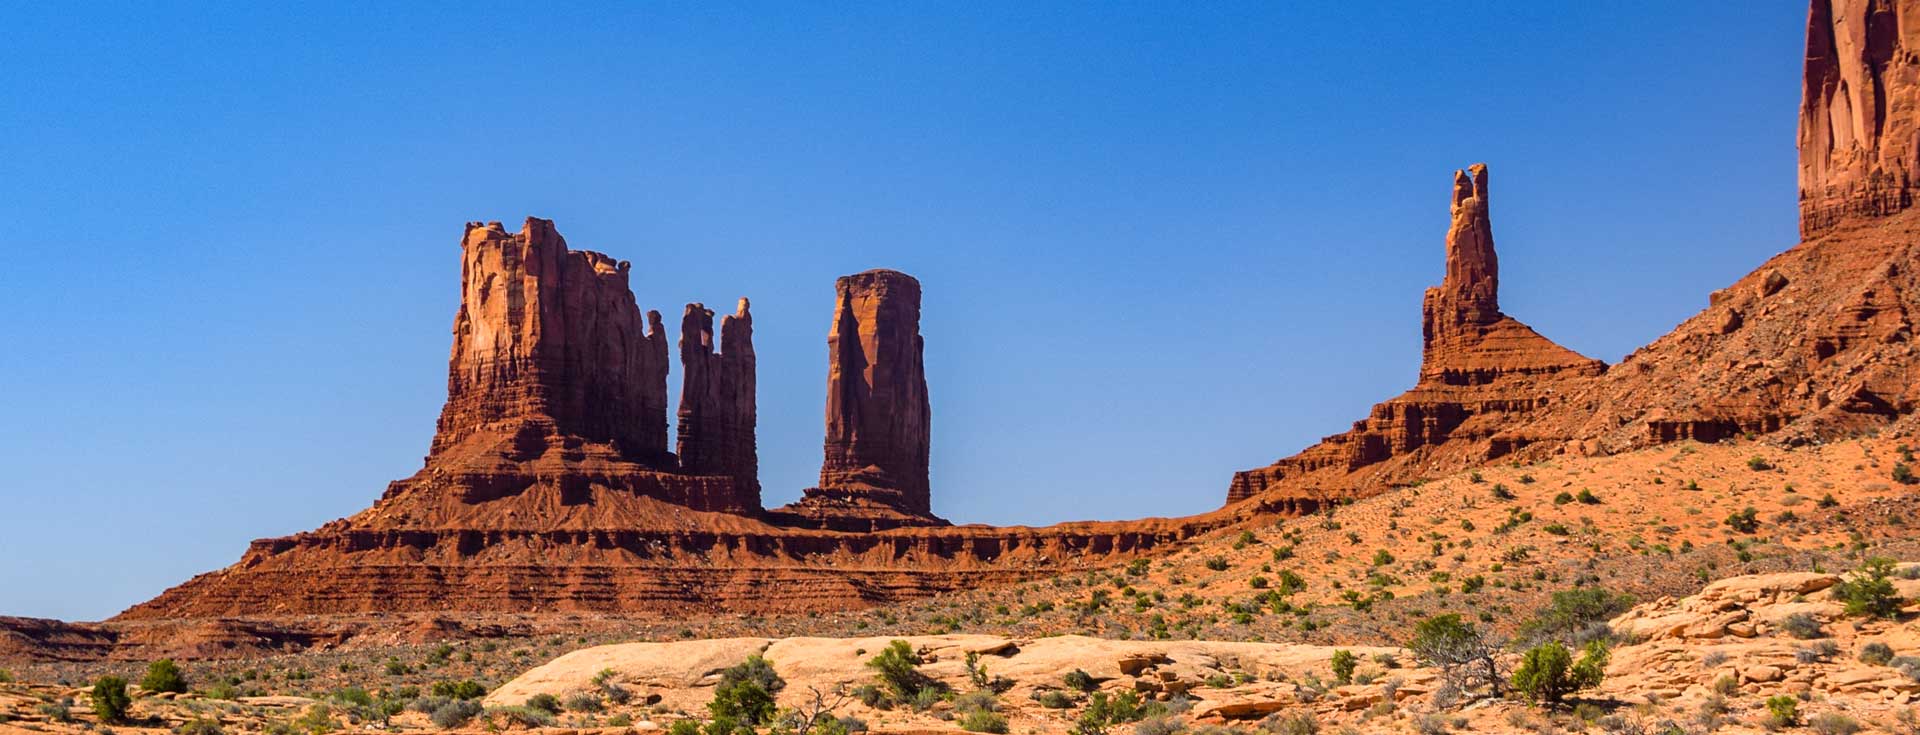 Tall red rock spire formation in the desert southwest